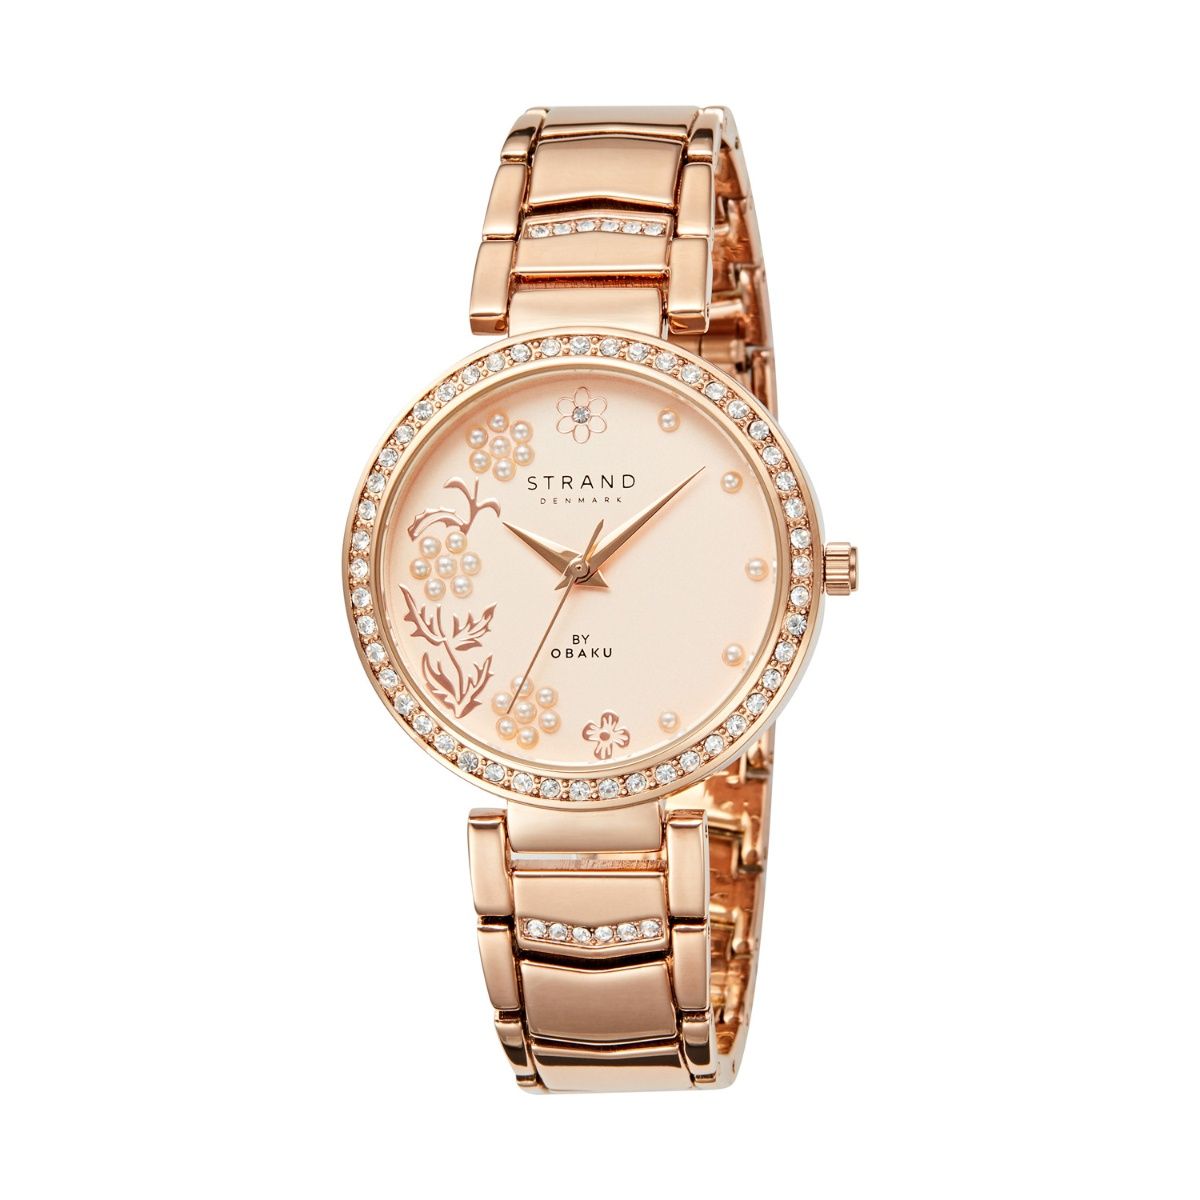 The Best Luxury Mother-of-Pearl Watches | La Patiala